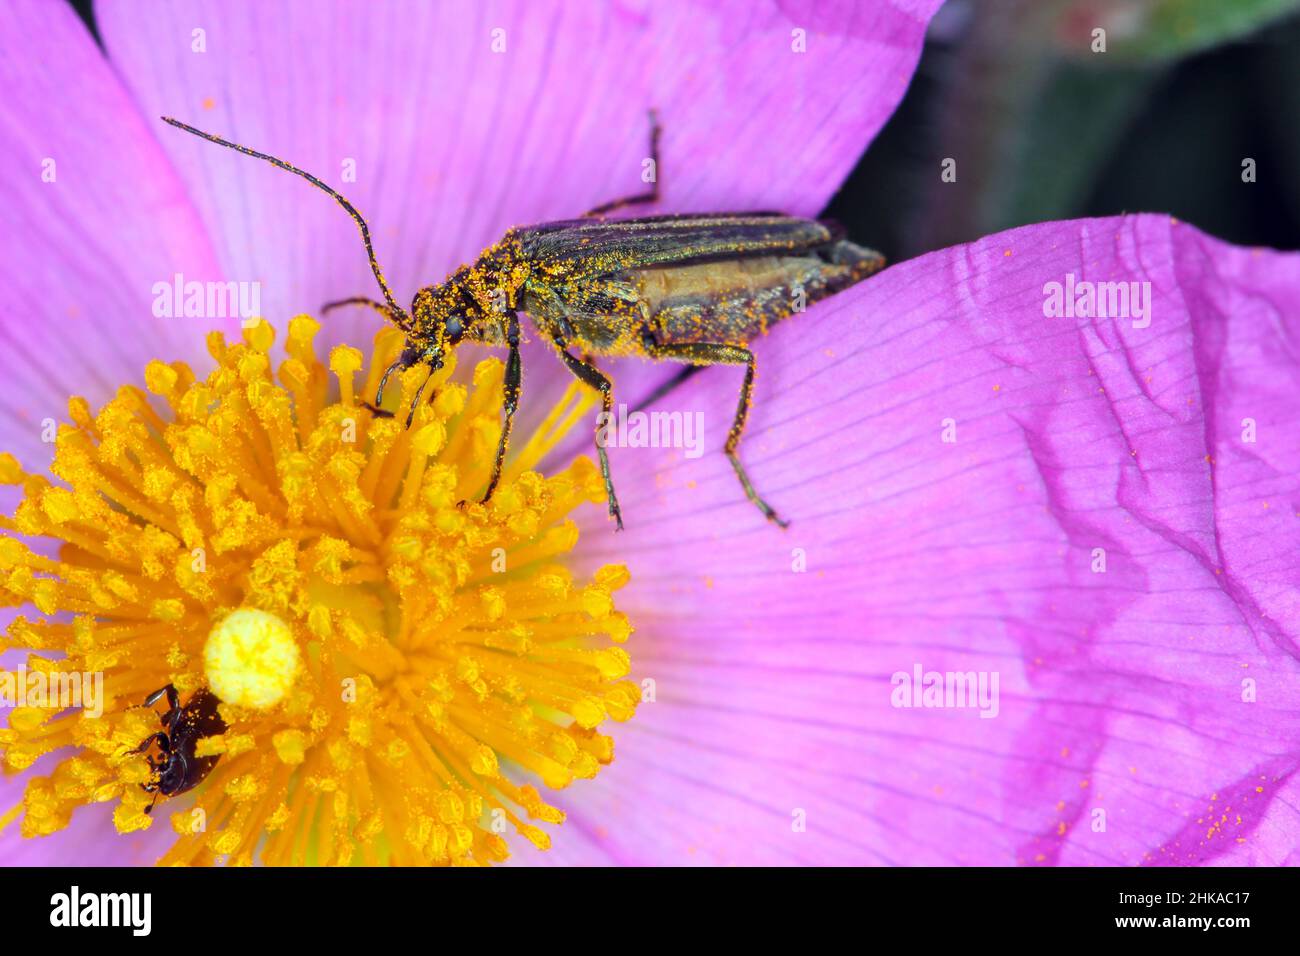 Oedemera nobilis, also known as the false oil beetle, thick-legged ...